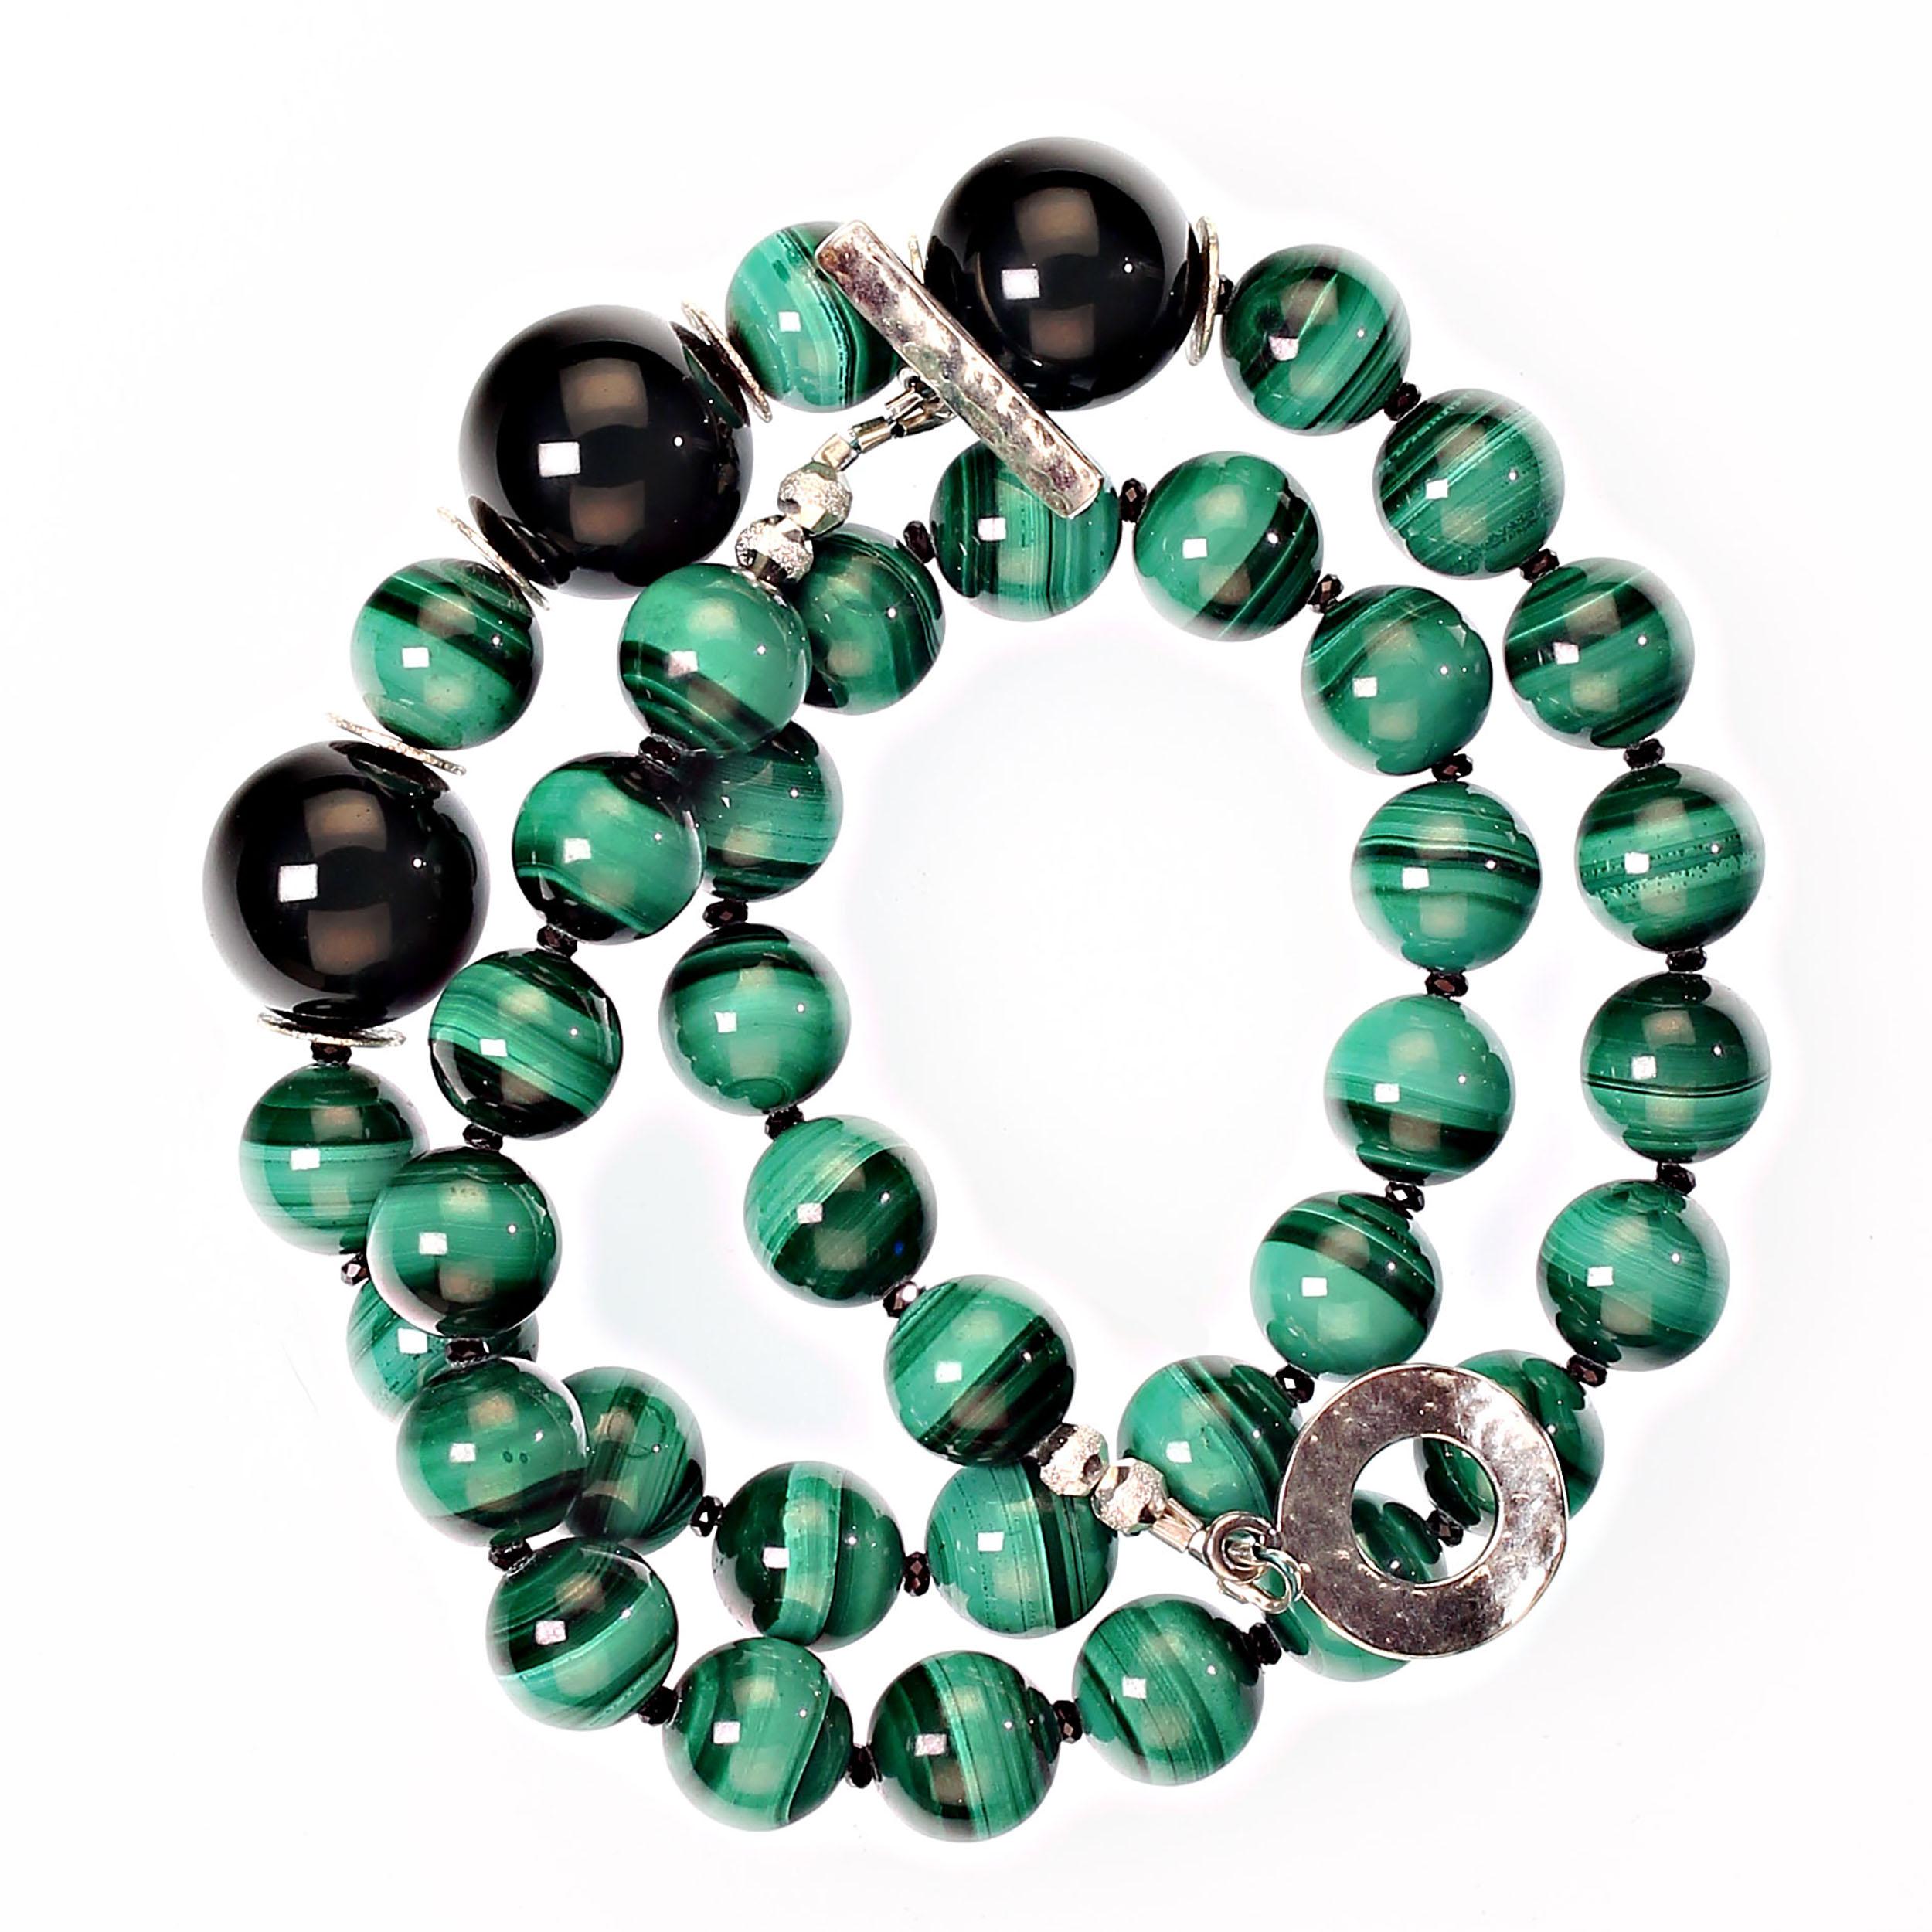 20 Inch magnificent Malachite necklace accented with black Spinel and black Onyx.  The 10MM beautifully banded smooth Malachite is separated by the sparkling faceted black Spinel. Three 15 MM smooth black Onyx are focal across the front of this